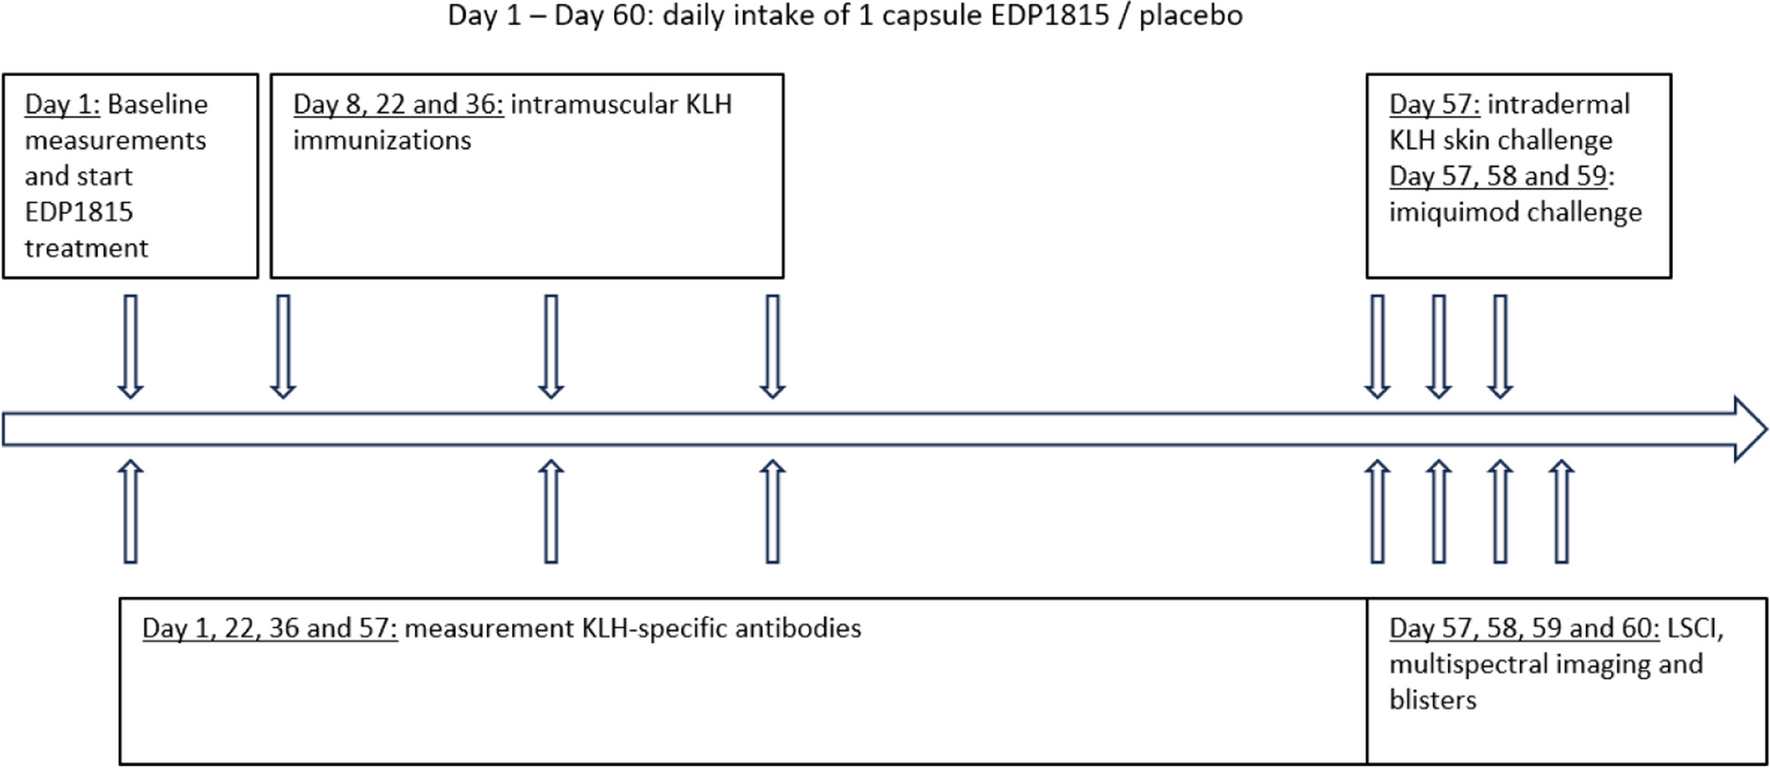 Immunomodulating effects of the single bacterial strain therapy EDP1815 on innate and adaptive immune challenge responses — a randomized, placebo-controlled clinical trial